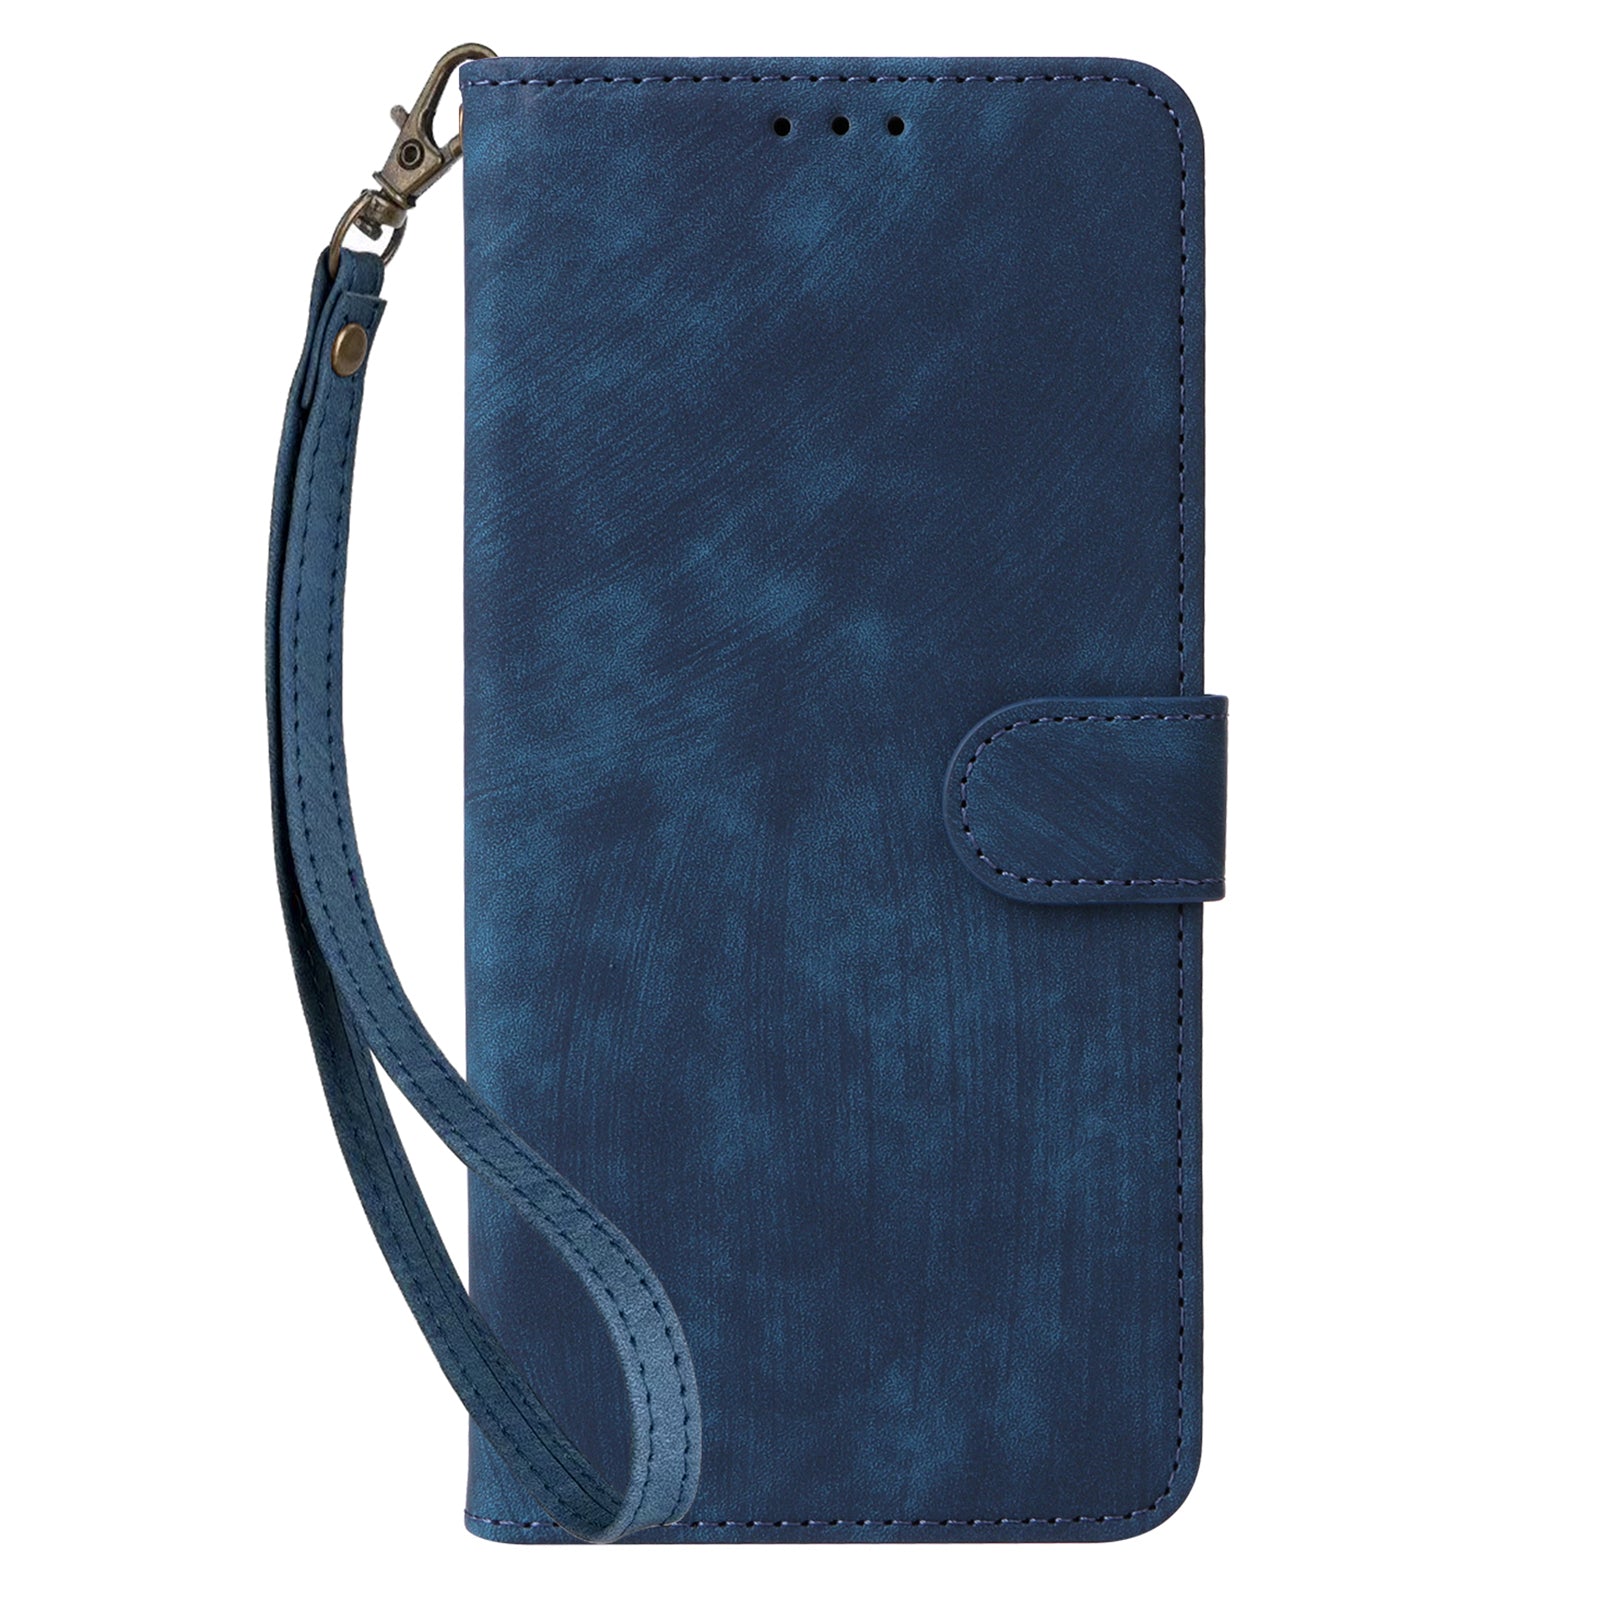 Uniqkart for Nokia XR21 RFID Blocking Phone Cover Wallet Stand Shell Shockproof Leather Case - Blue